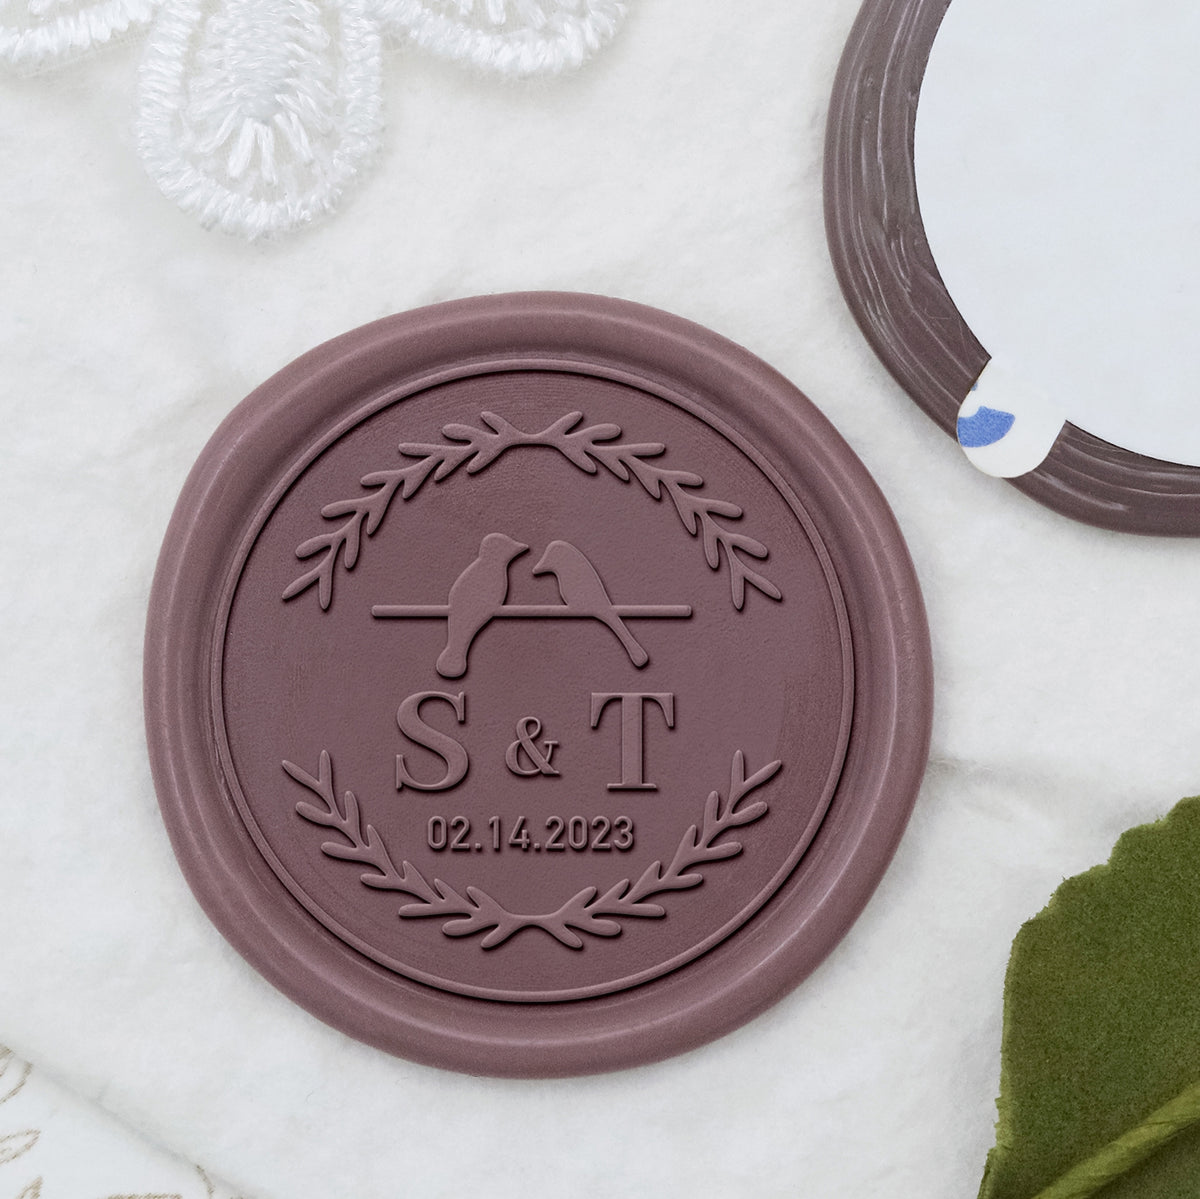 Wedding Wax Seal Stamp - Special Wedding Custom Wax Seal Stamp - with Double initials / Couple's Names / Wedding Rings / Flower Patterns